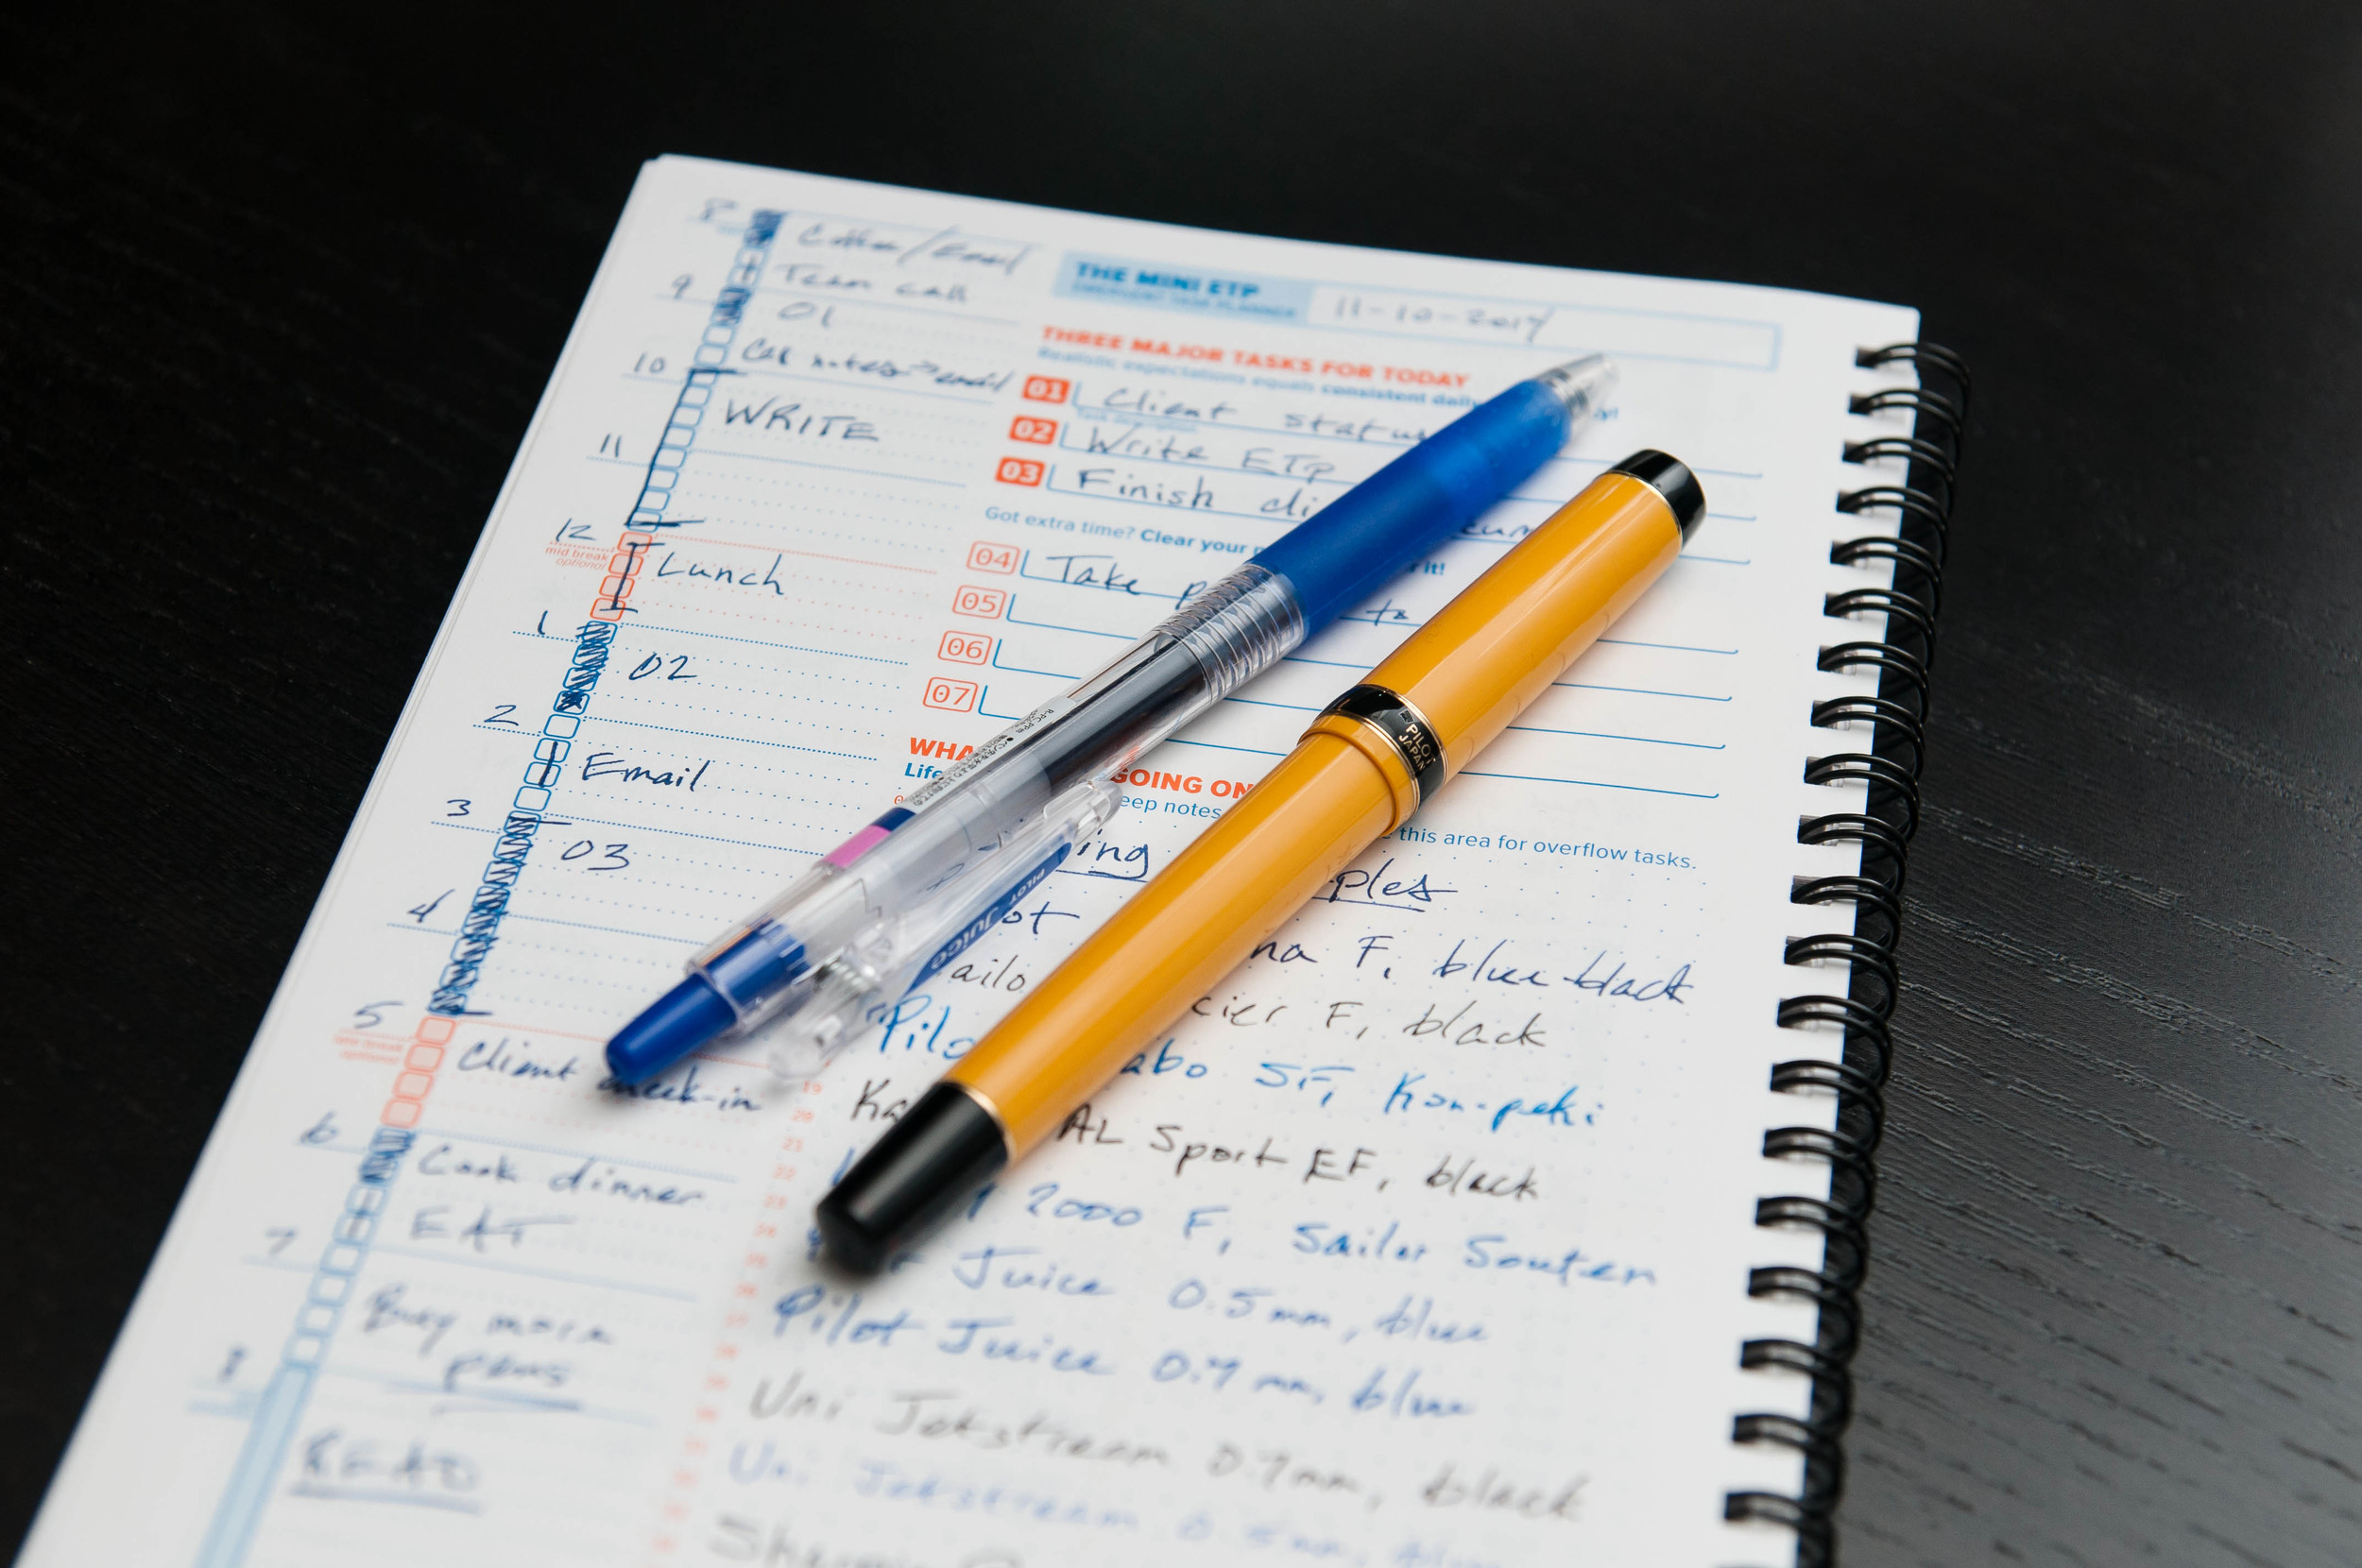 Guest Review: Oxford Stone Paper Note Book — The Pen Addict